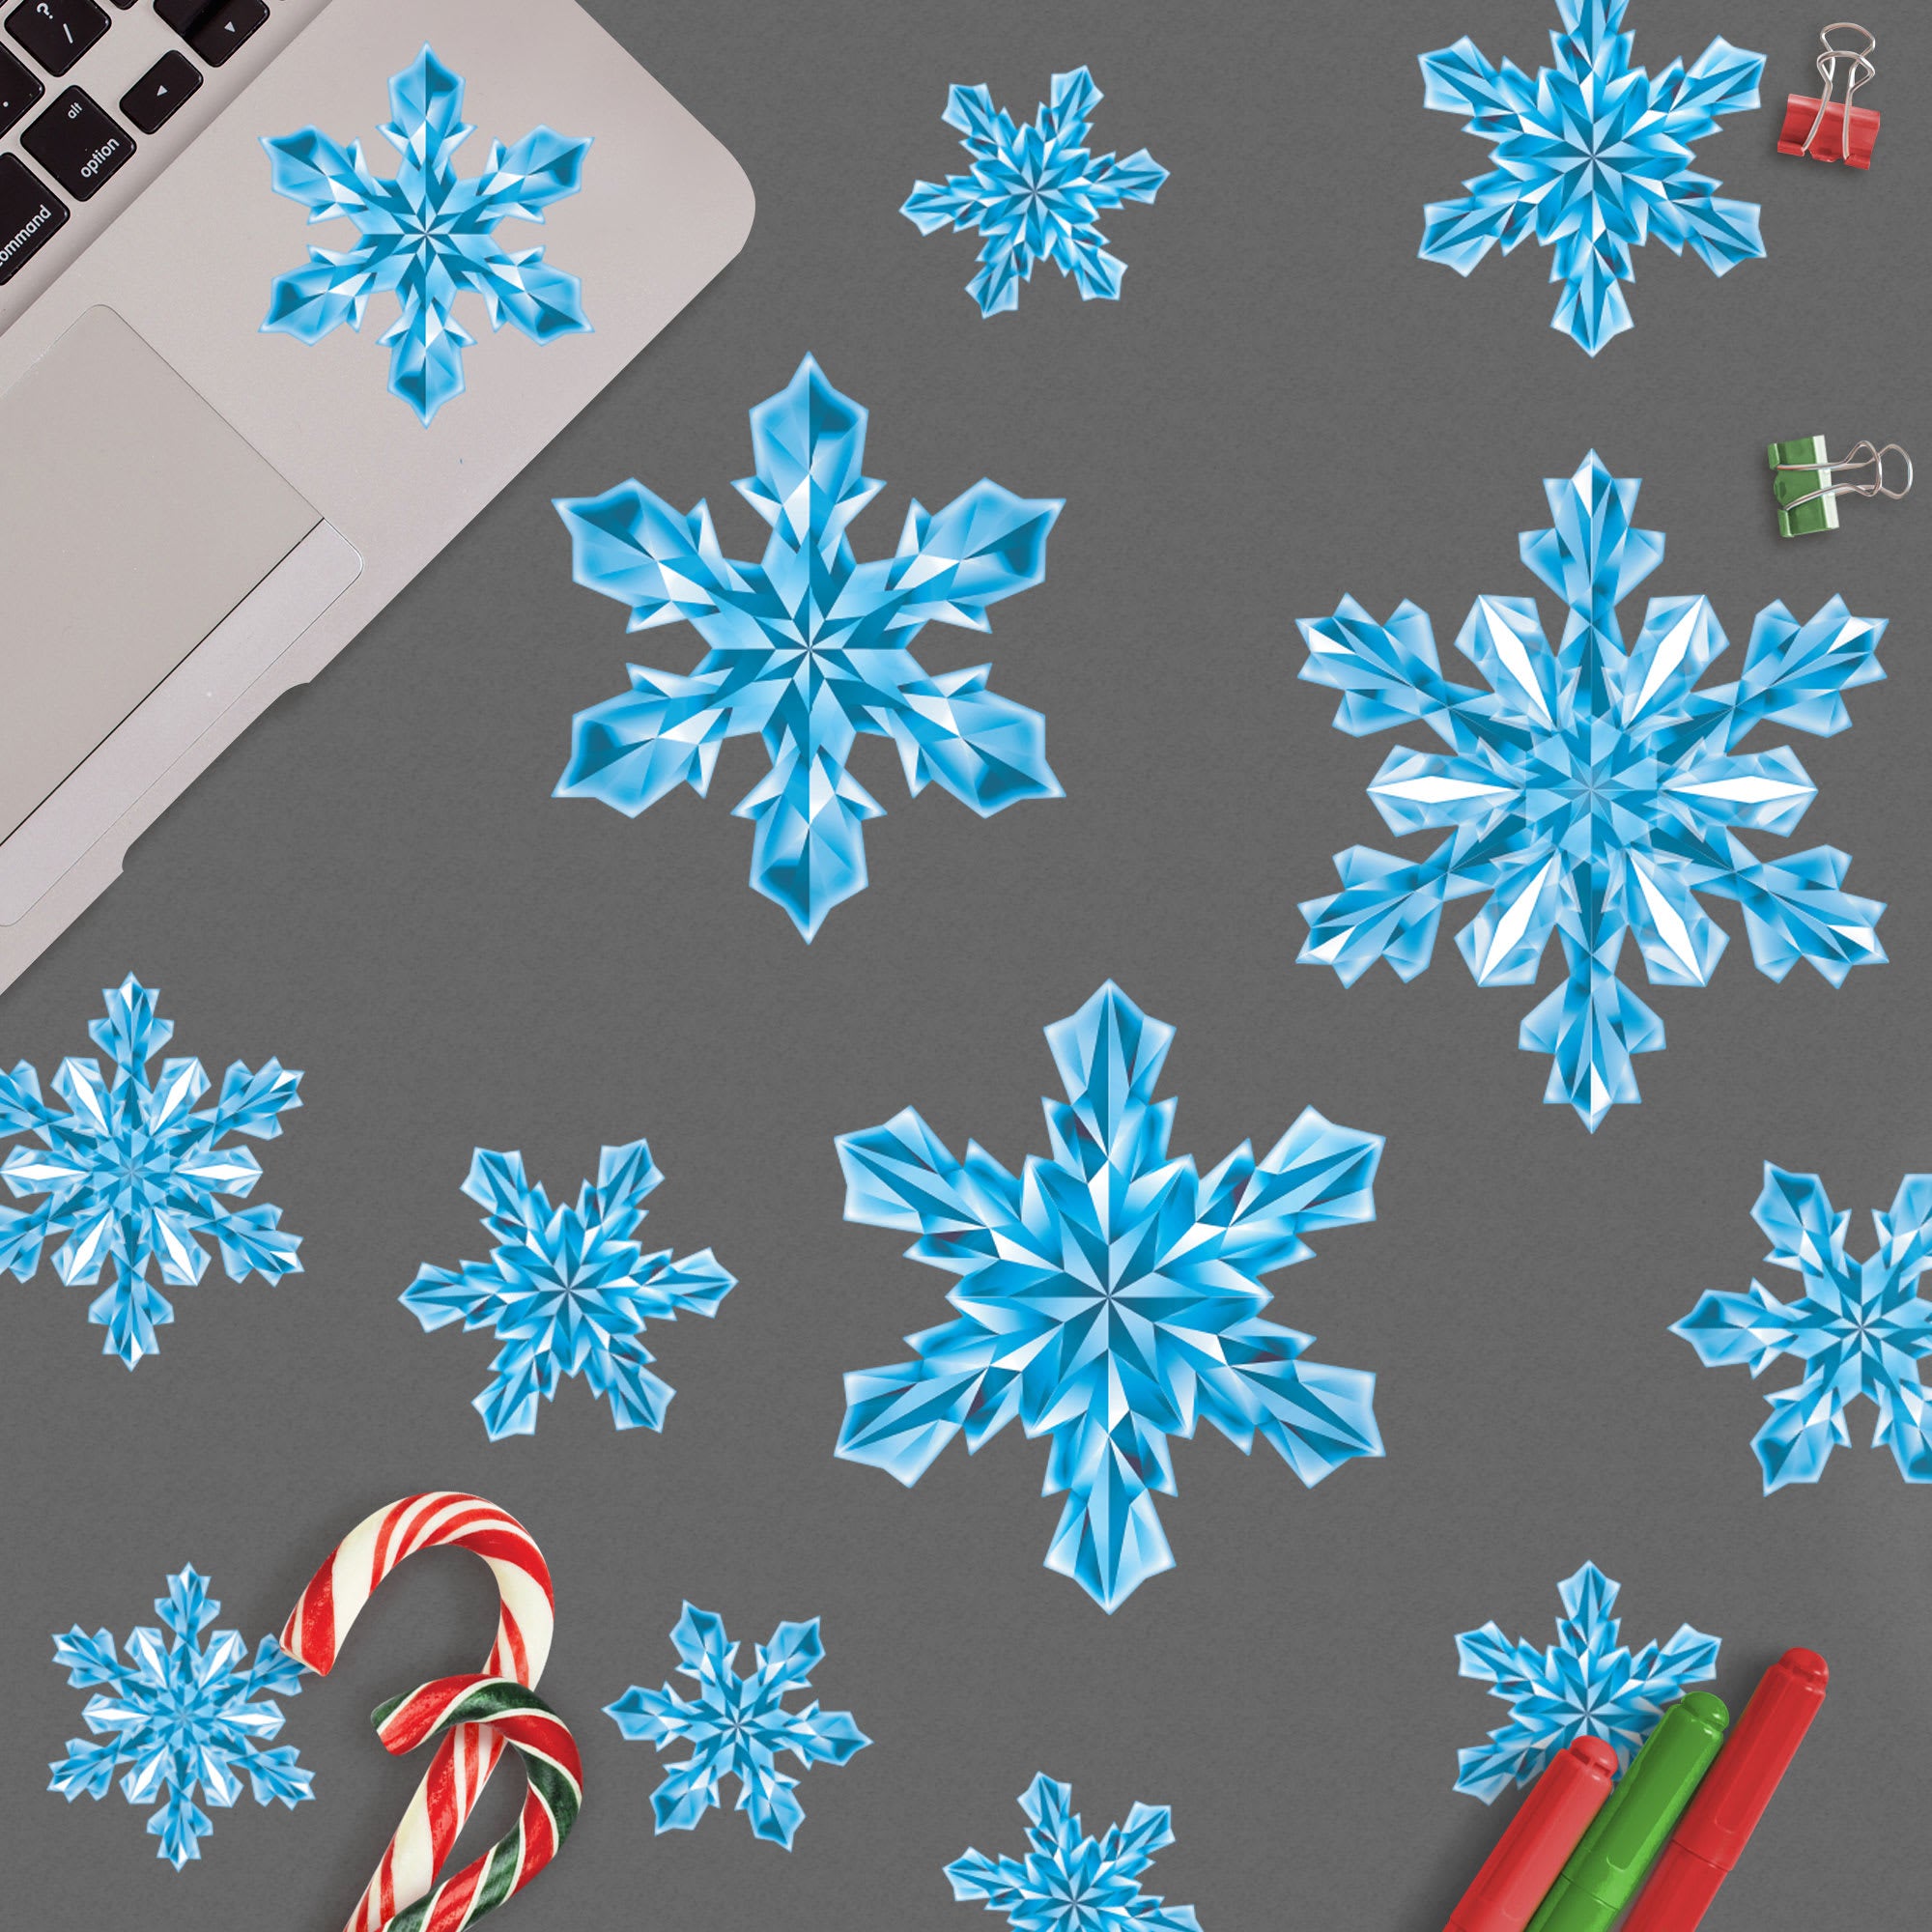 Snowflake Crystal Collection - Removable Vinyl Decal 12.0"W x 17.0"H by Fathead